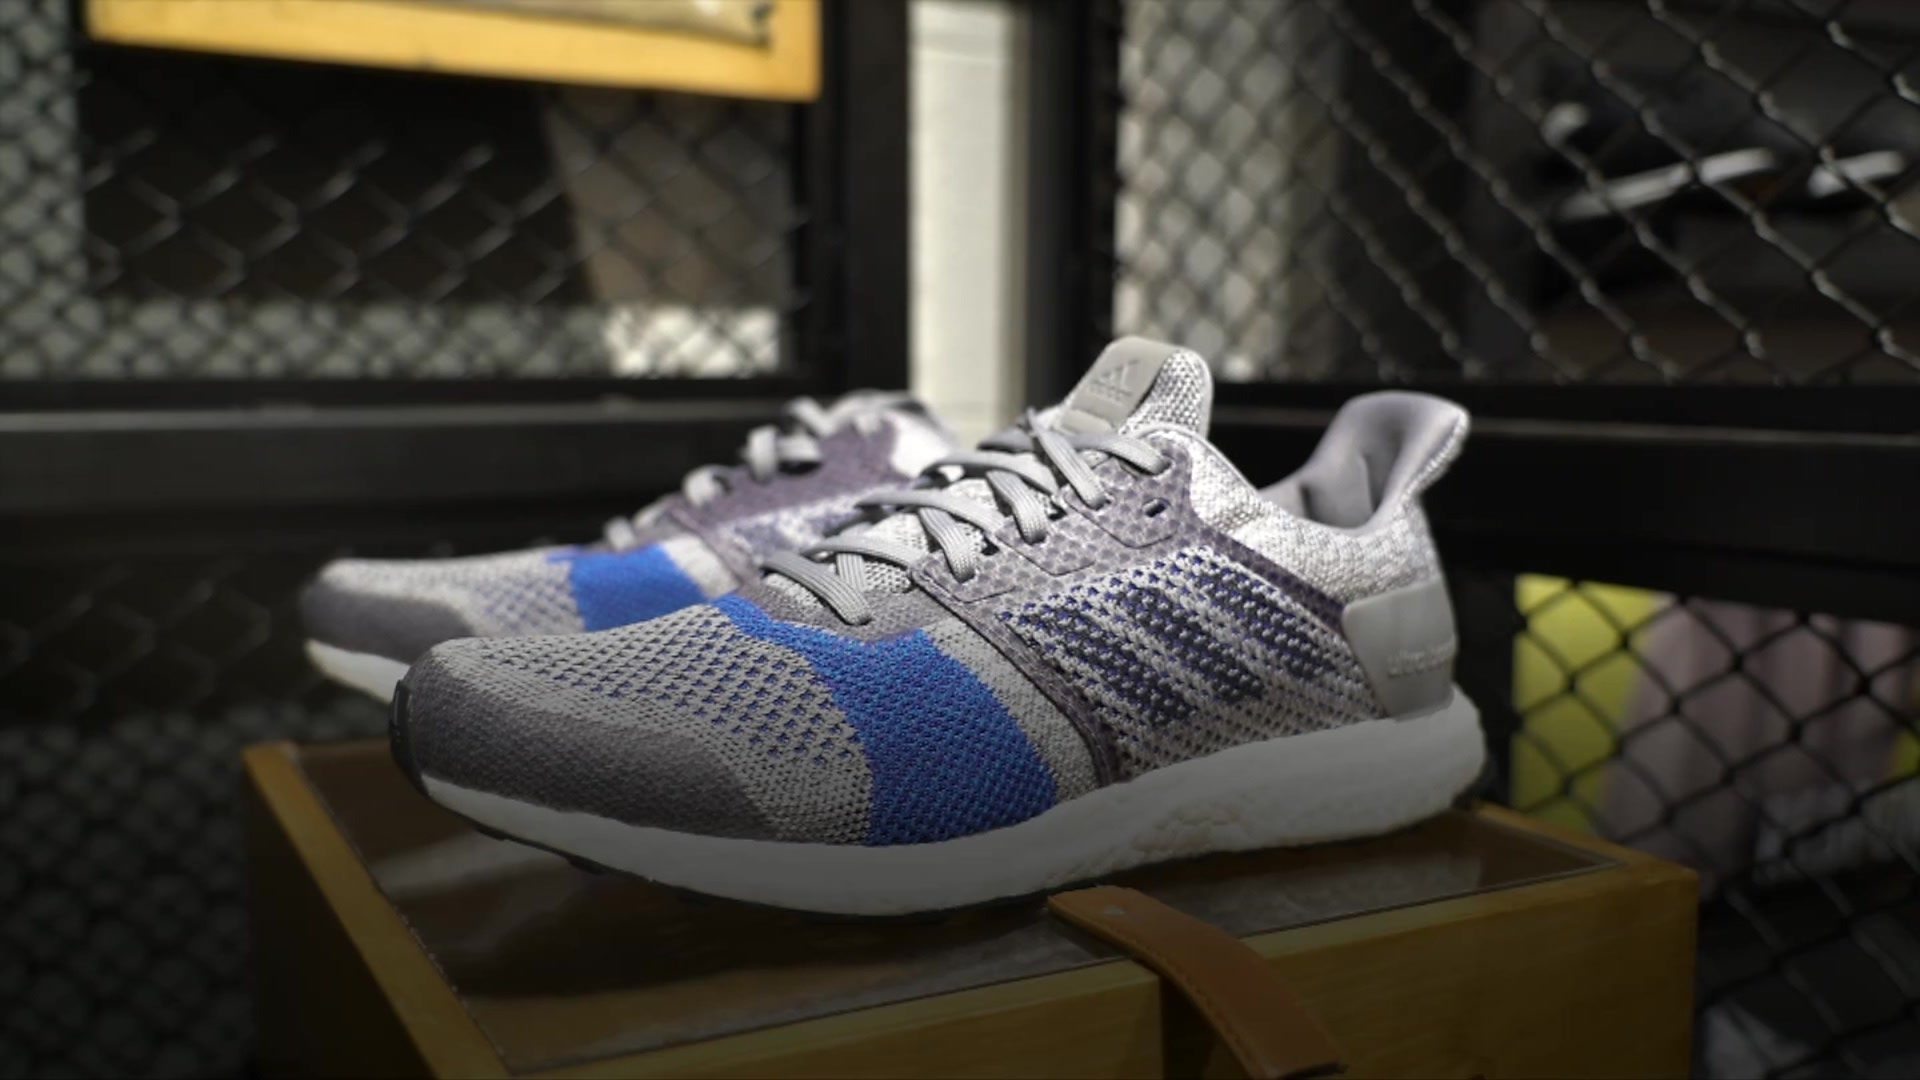 adidas making shoes out of plastic